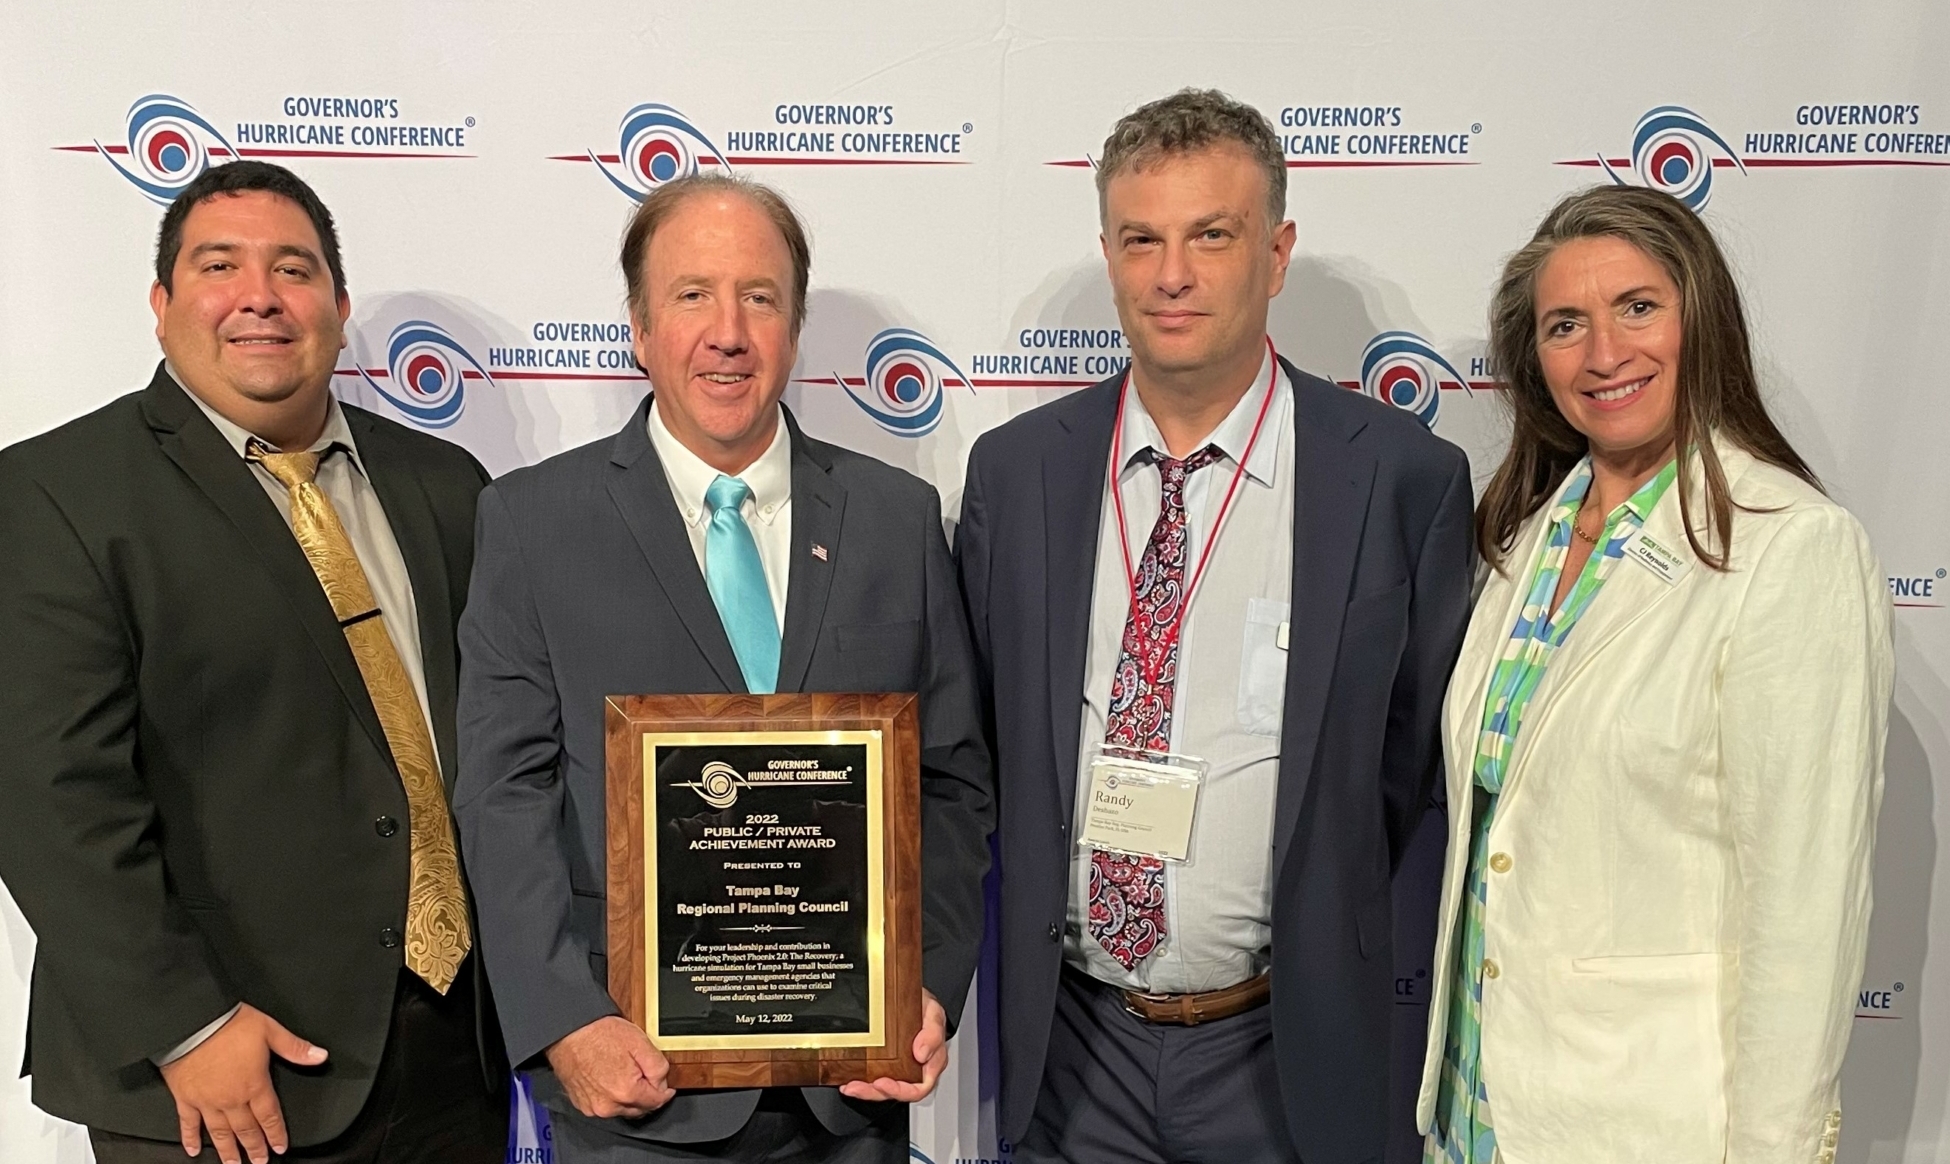 TBRPC is recognized at the 2022 Governor’s Hurricane Conference